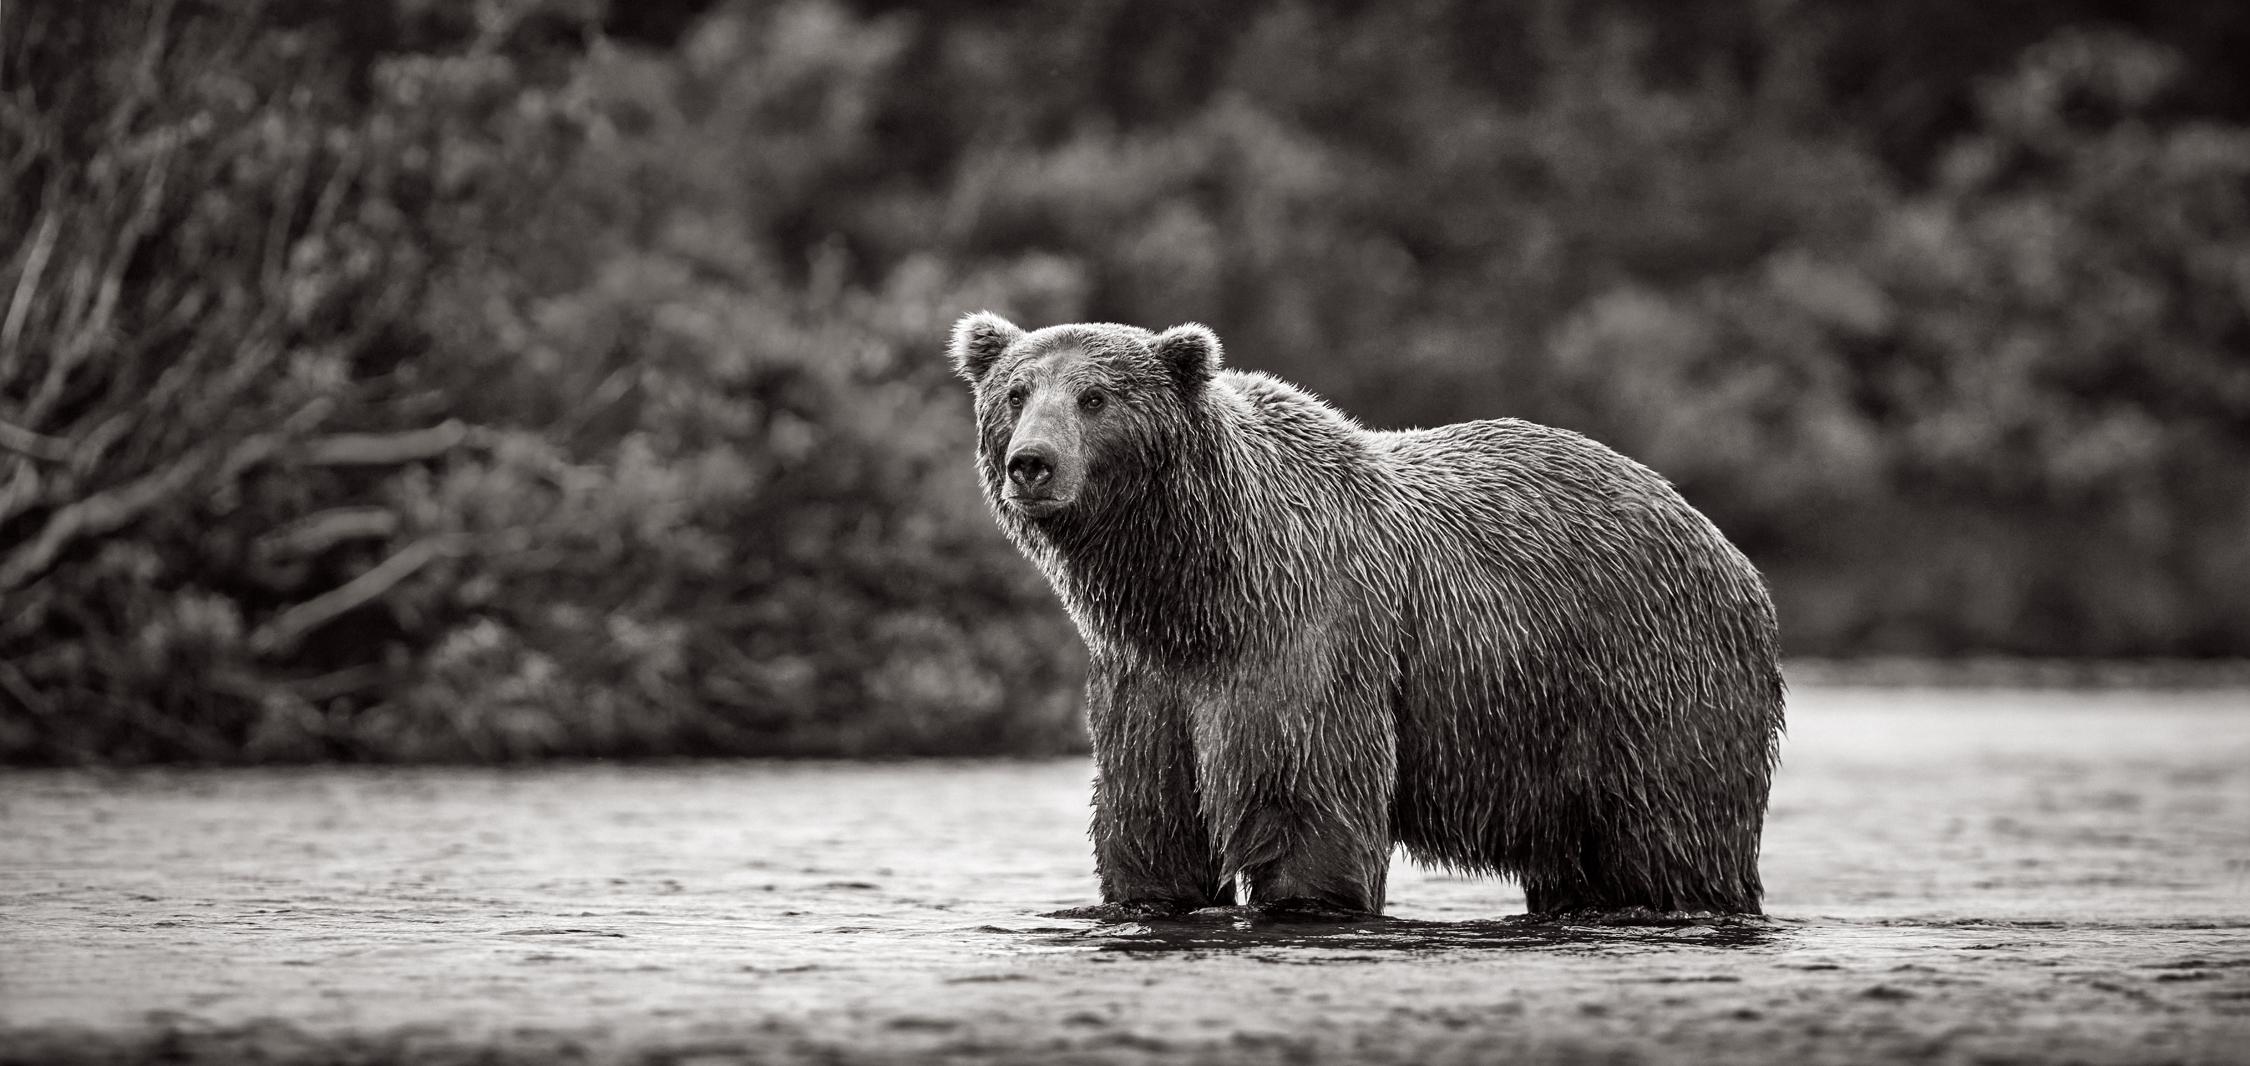 Drew Doggett Black and White Photograph – Brown Bear In Alaska Waits In The Middle Of Creek For Salmon